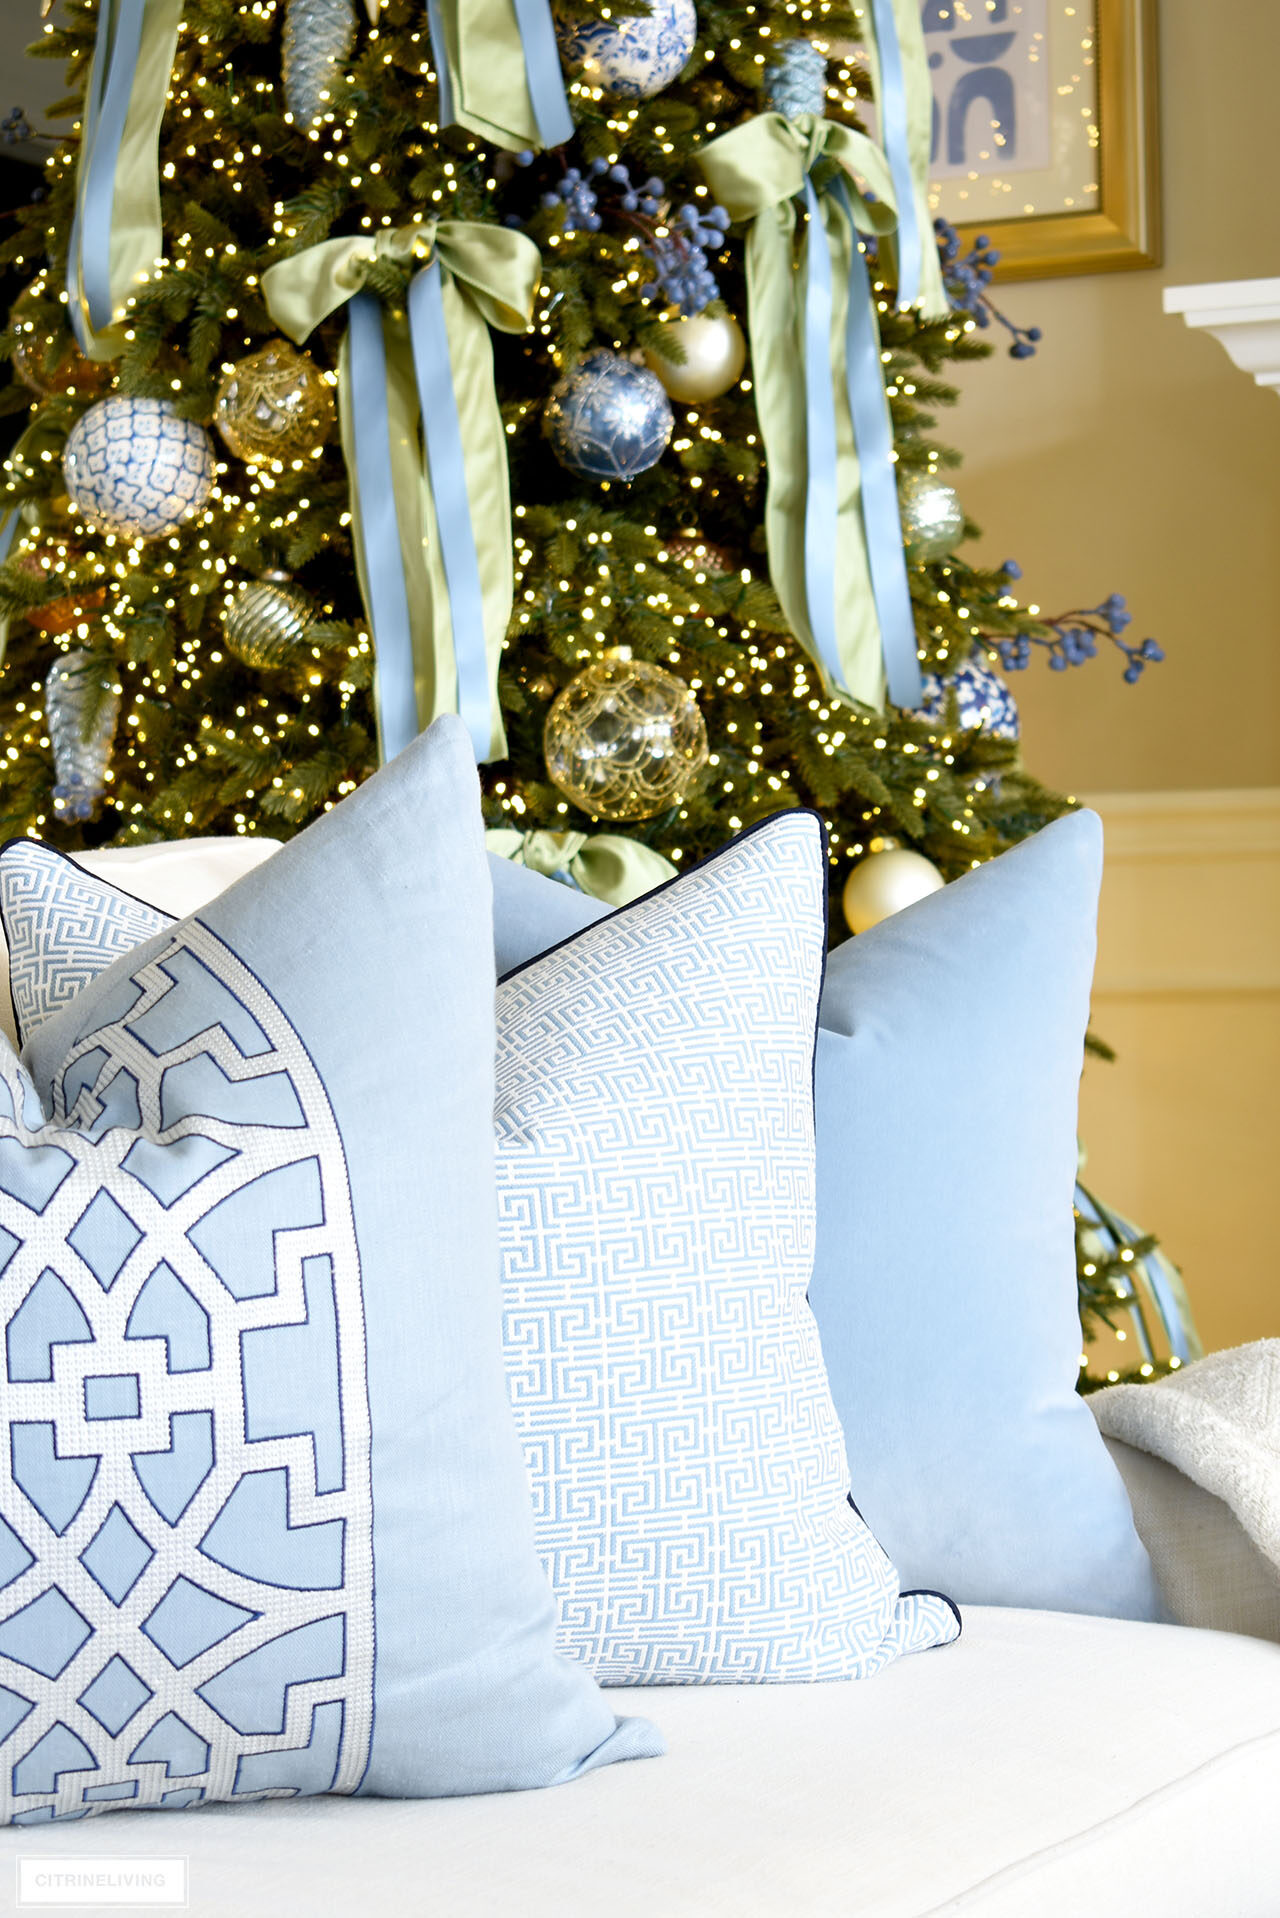 Blue and white throw pillows on a white sofa, Christmas tree decorated with light green and blue bows sits behind.